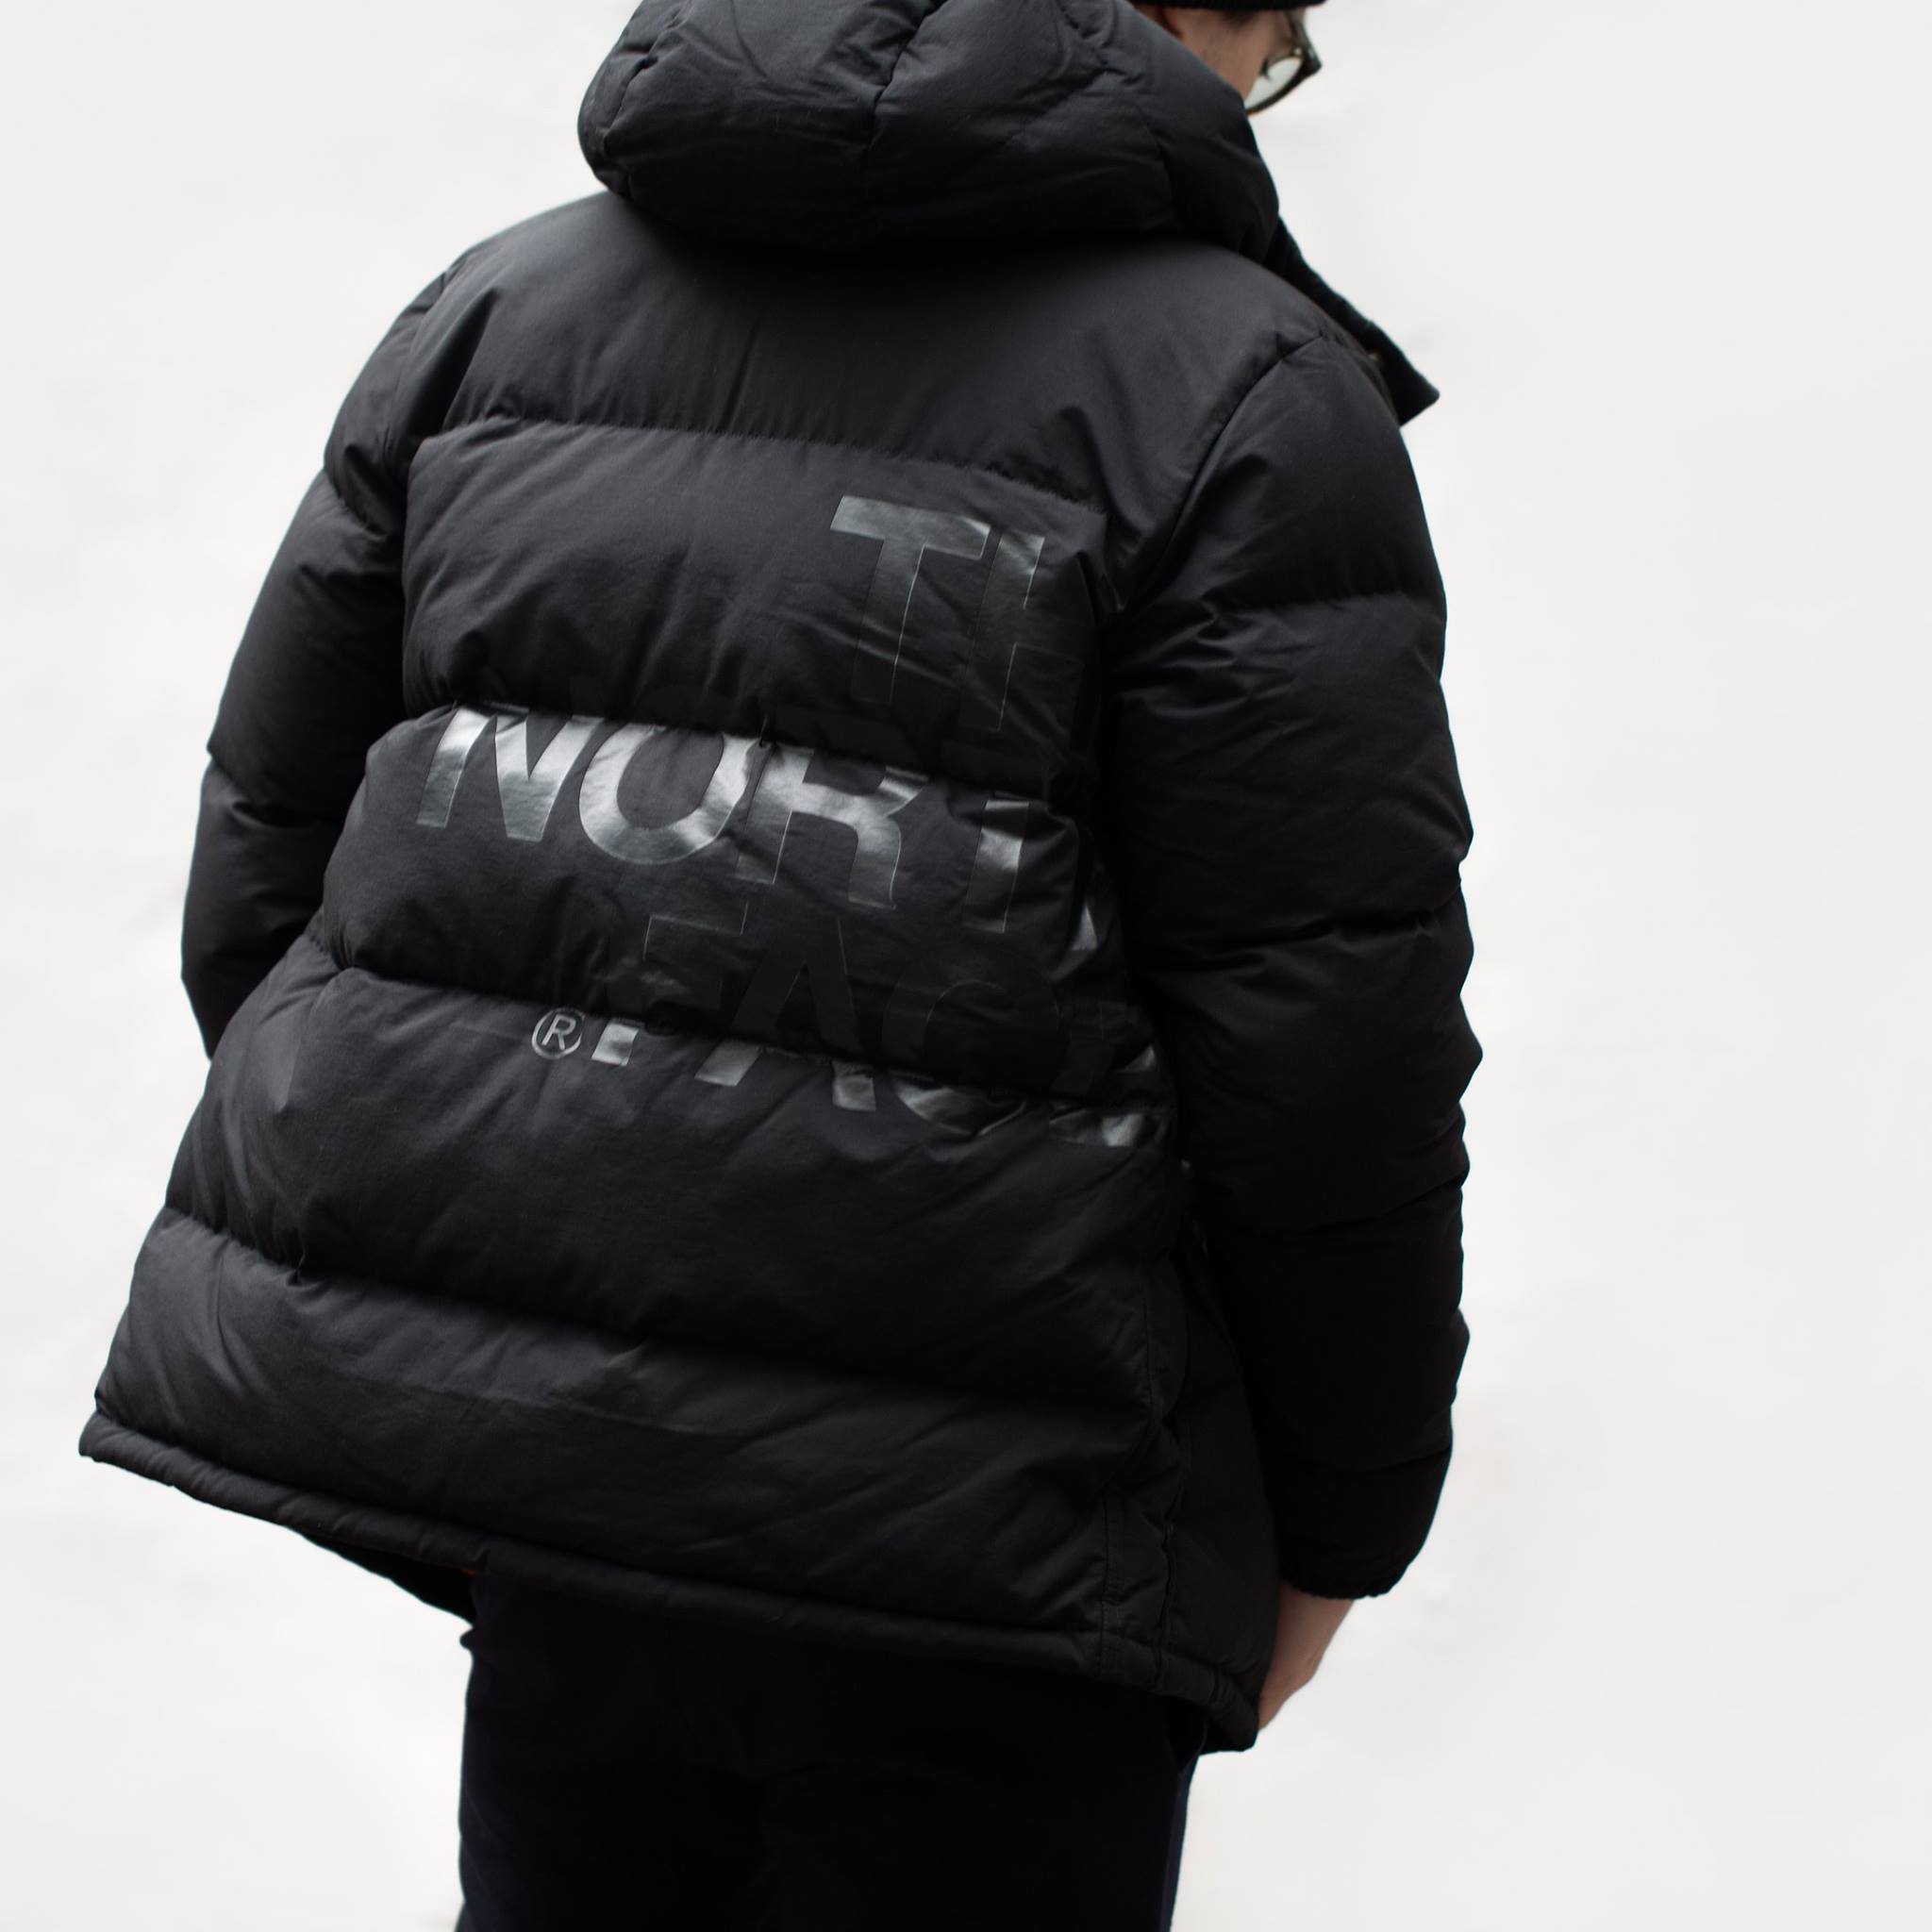 Junya Watanabe MAN and The North Face brings back an iconic puffer